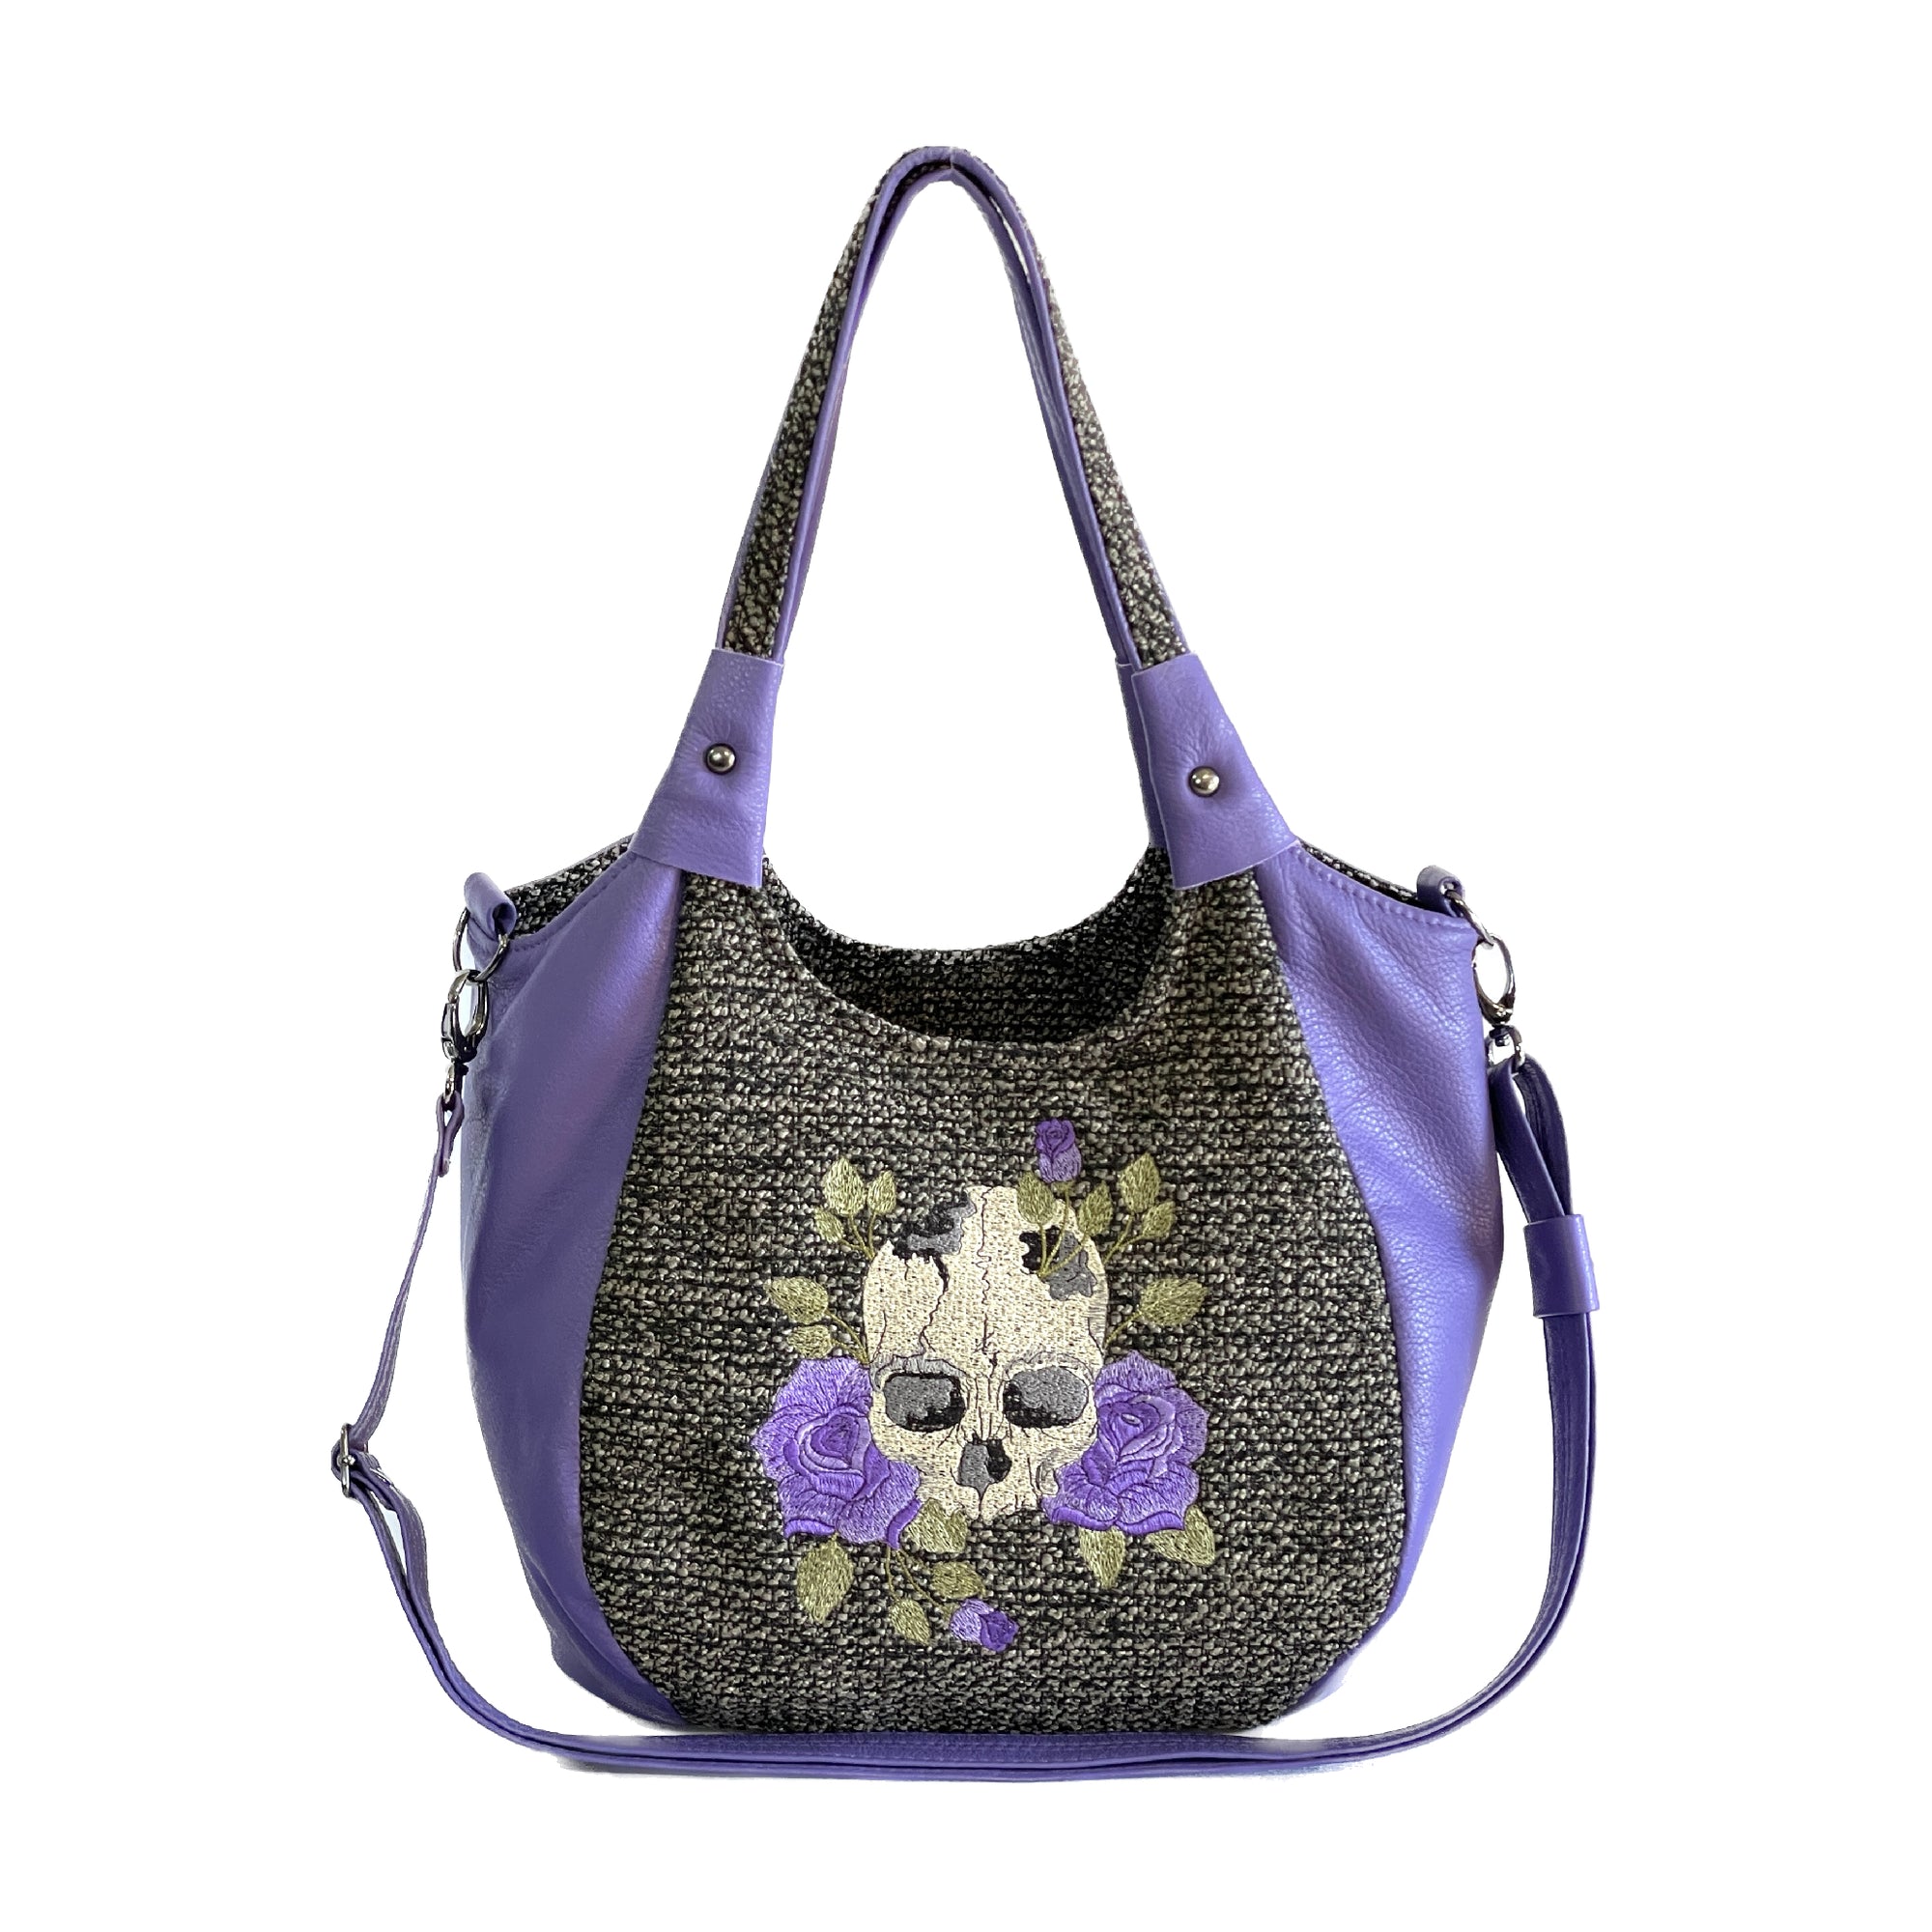 Sharla Satchel Skull and Roses Tweed and Leather